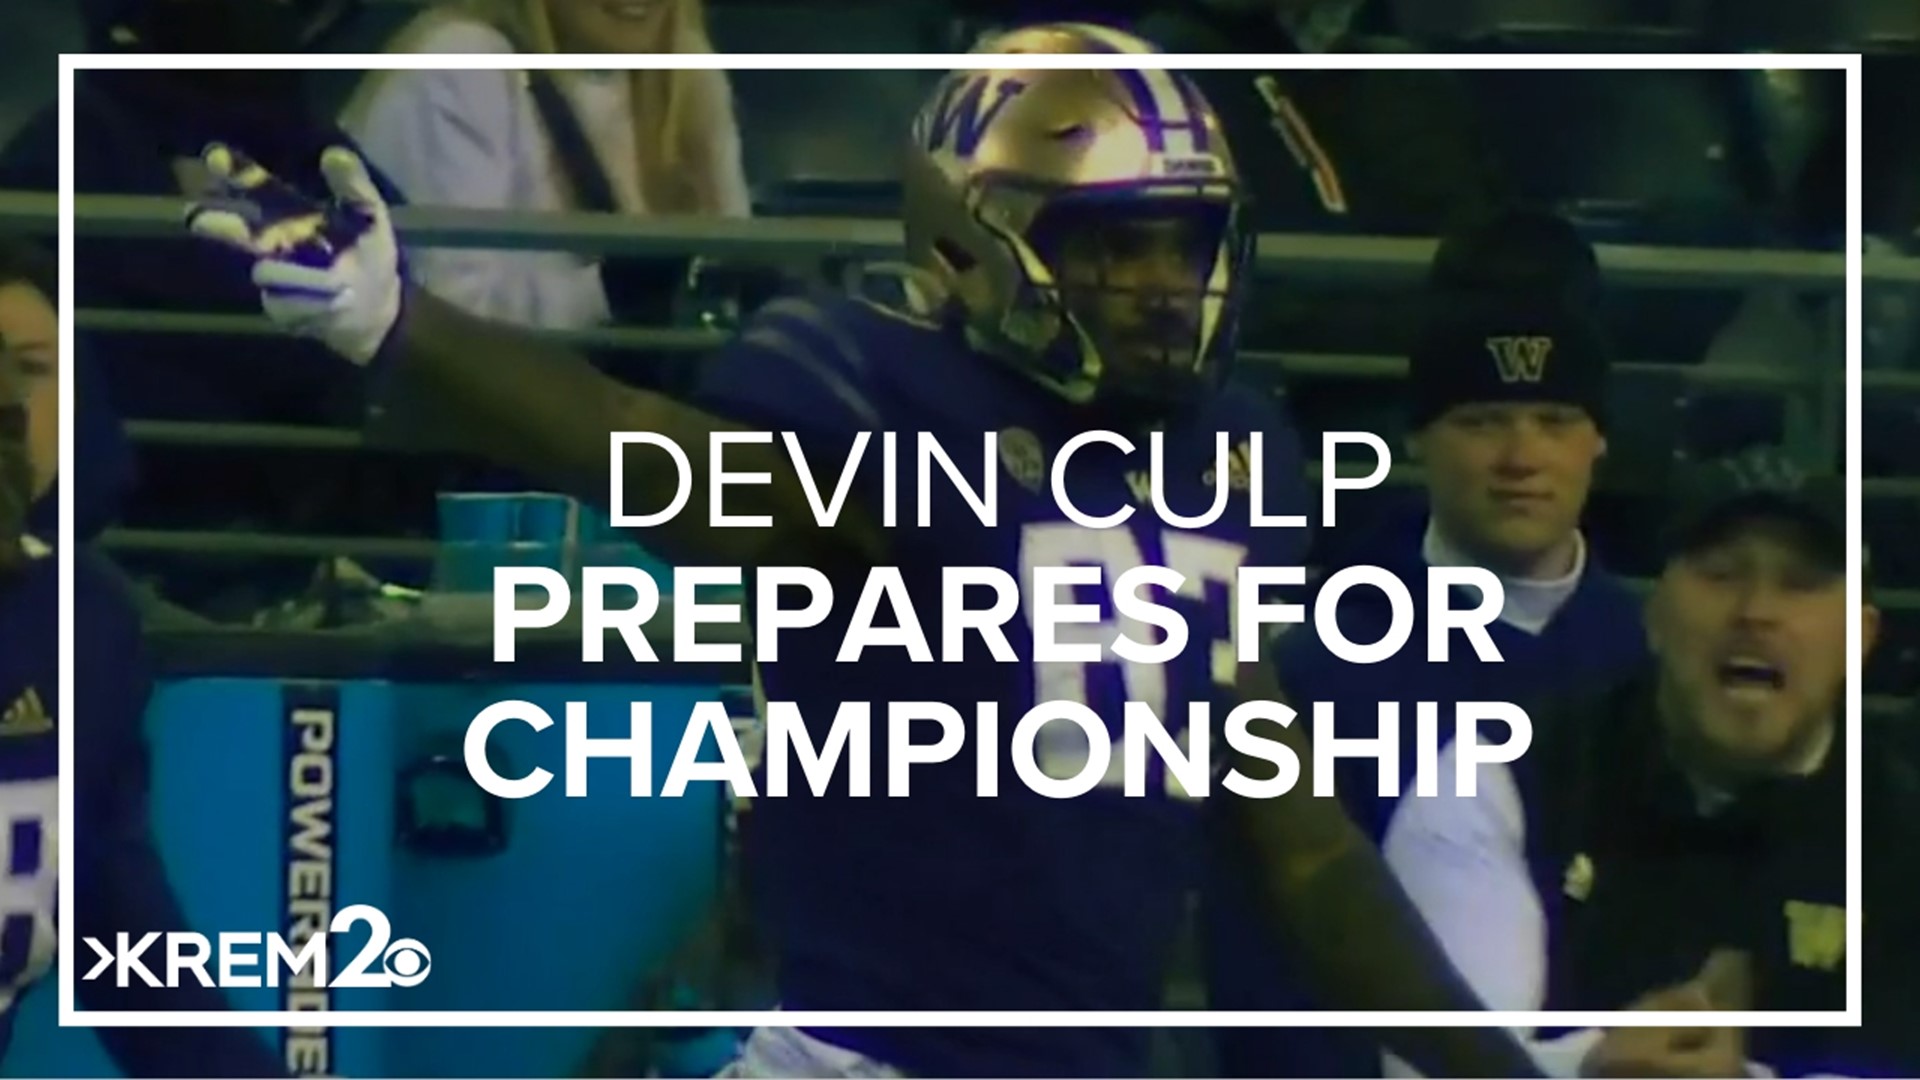 UW tight end Devin Culp discusses his Spokane roots and his preparation for Monday's national title game